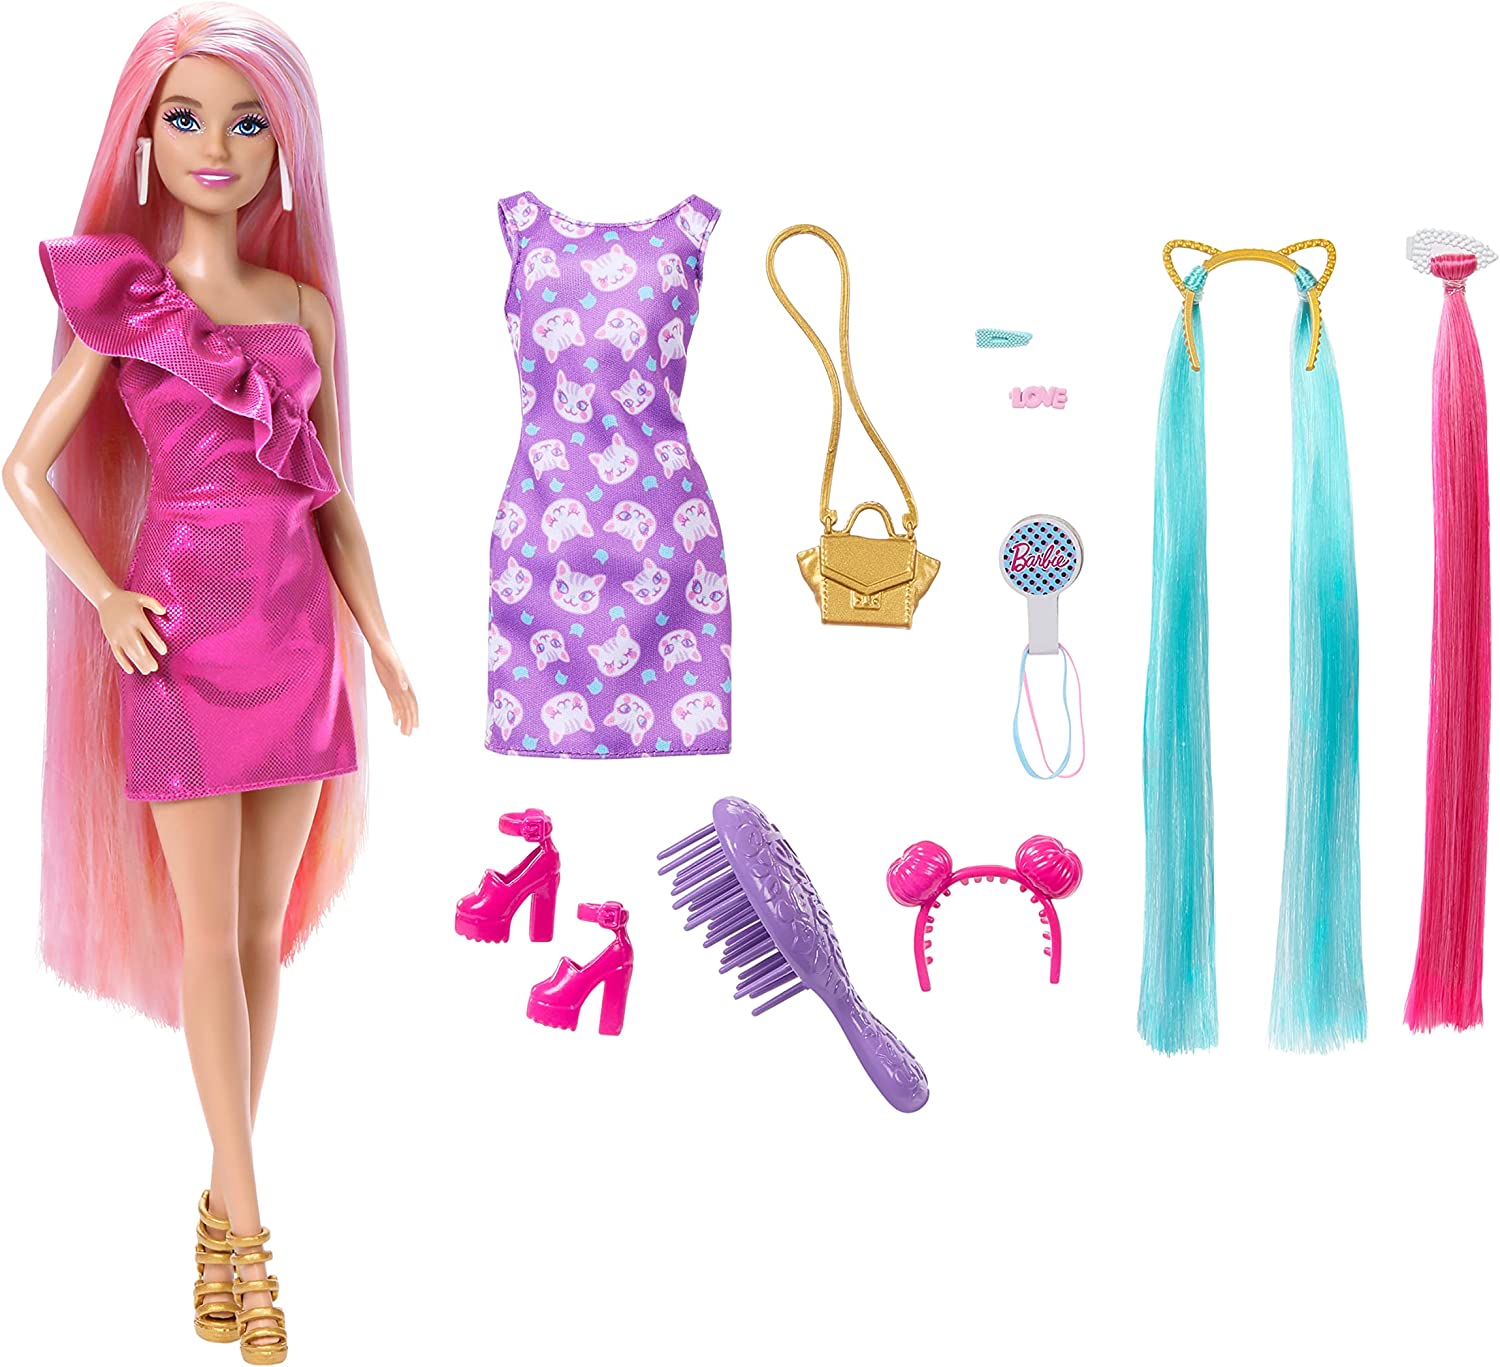 1681322190 Youloveit Com Barbie Totally Hair 2023 Doll 